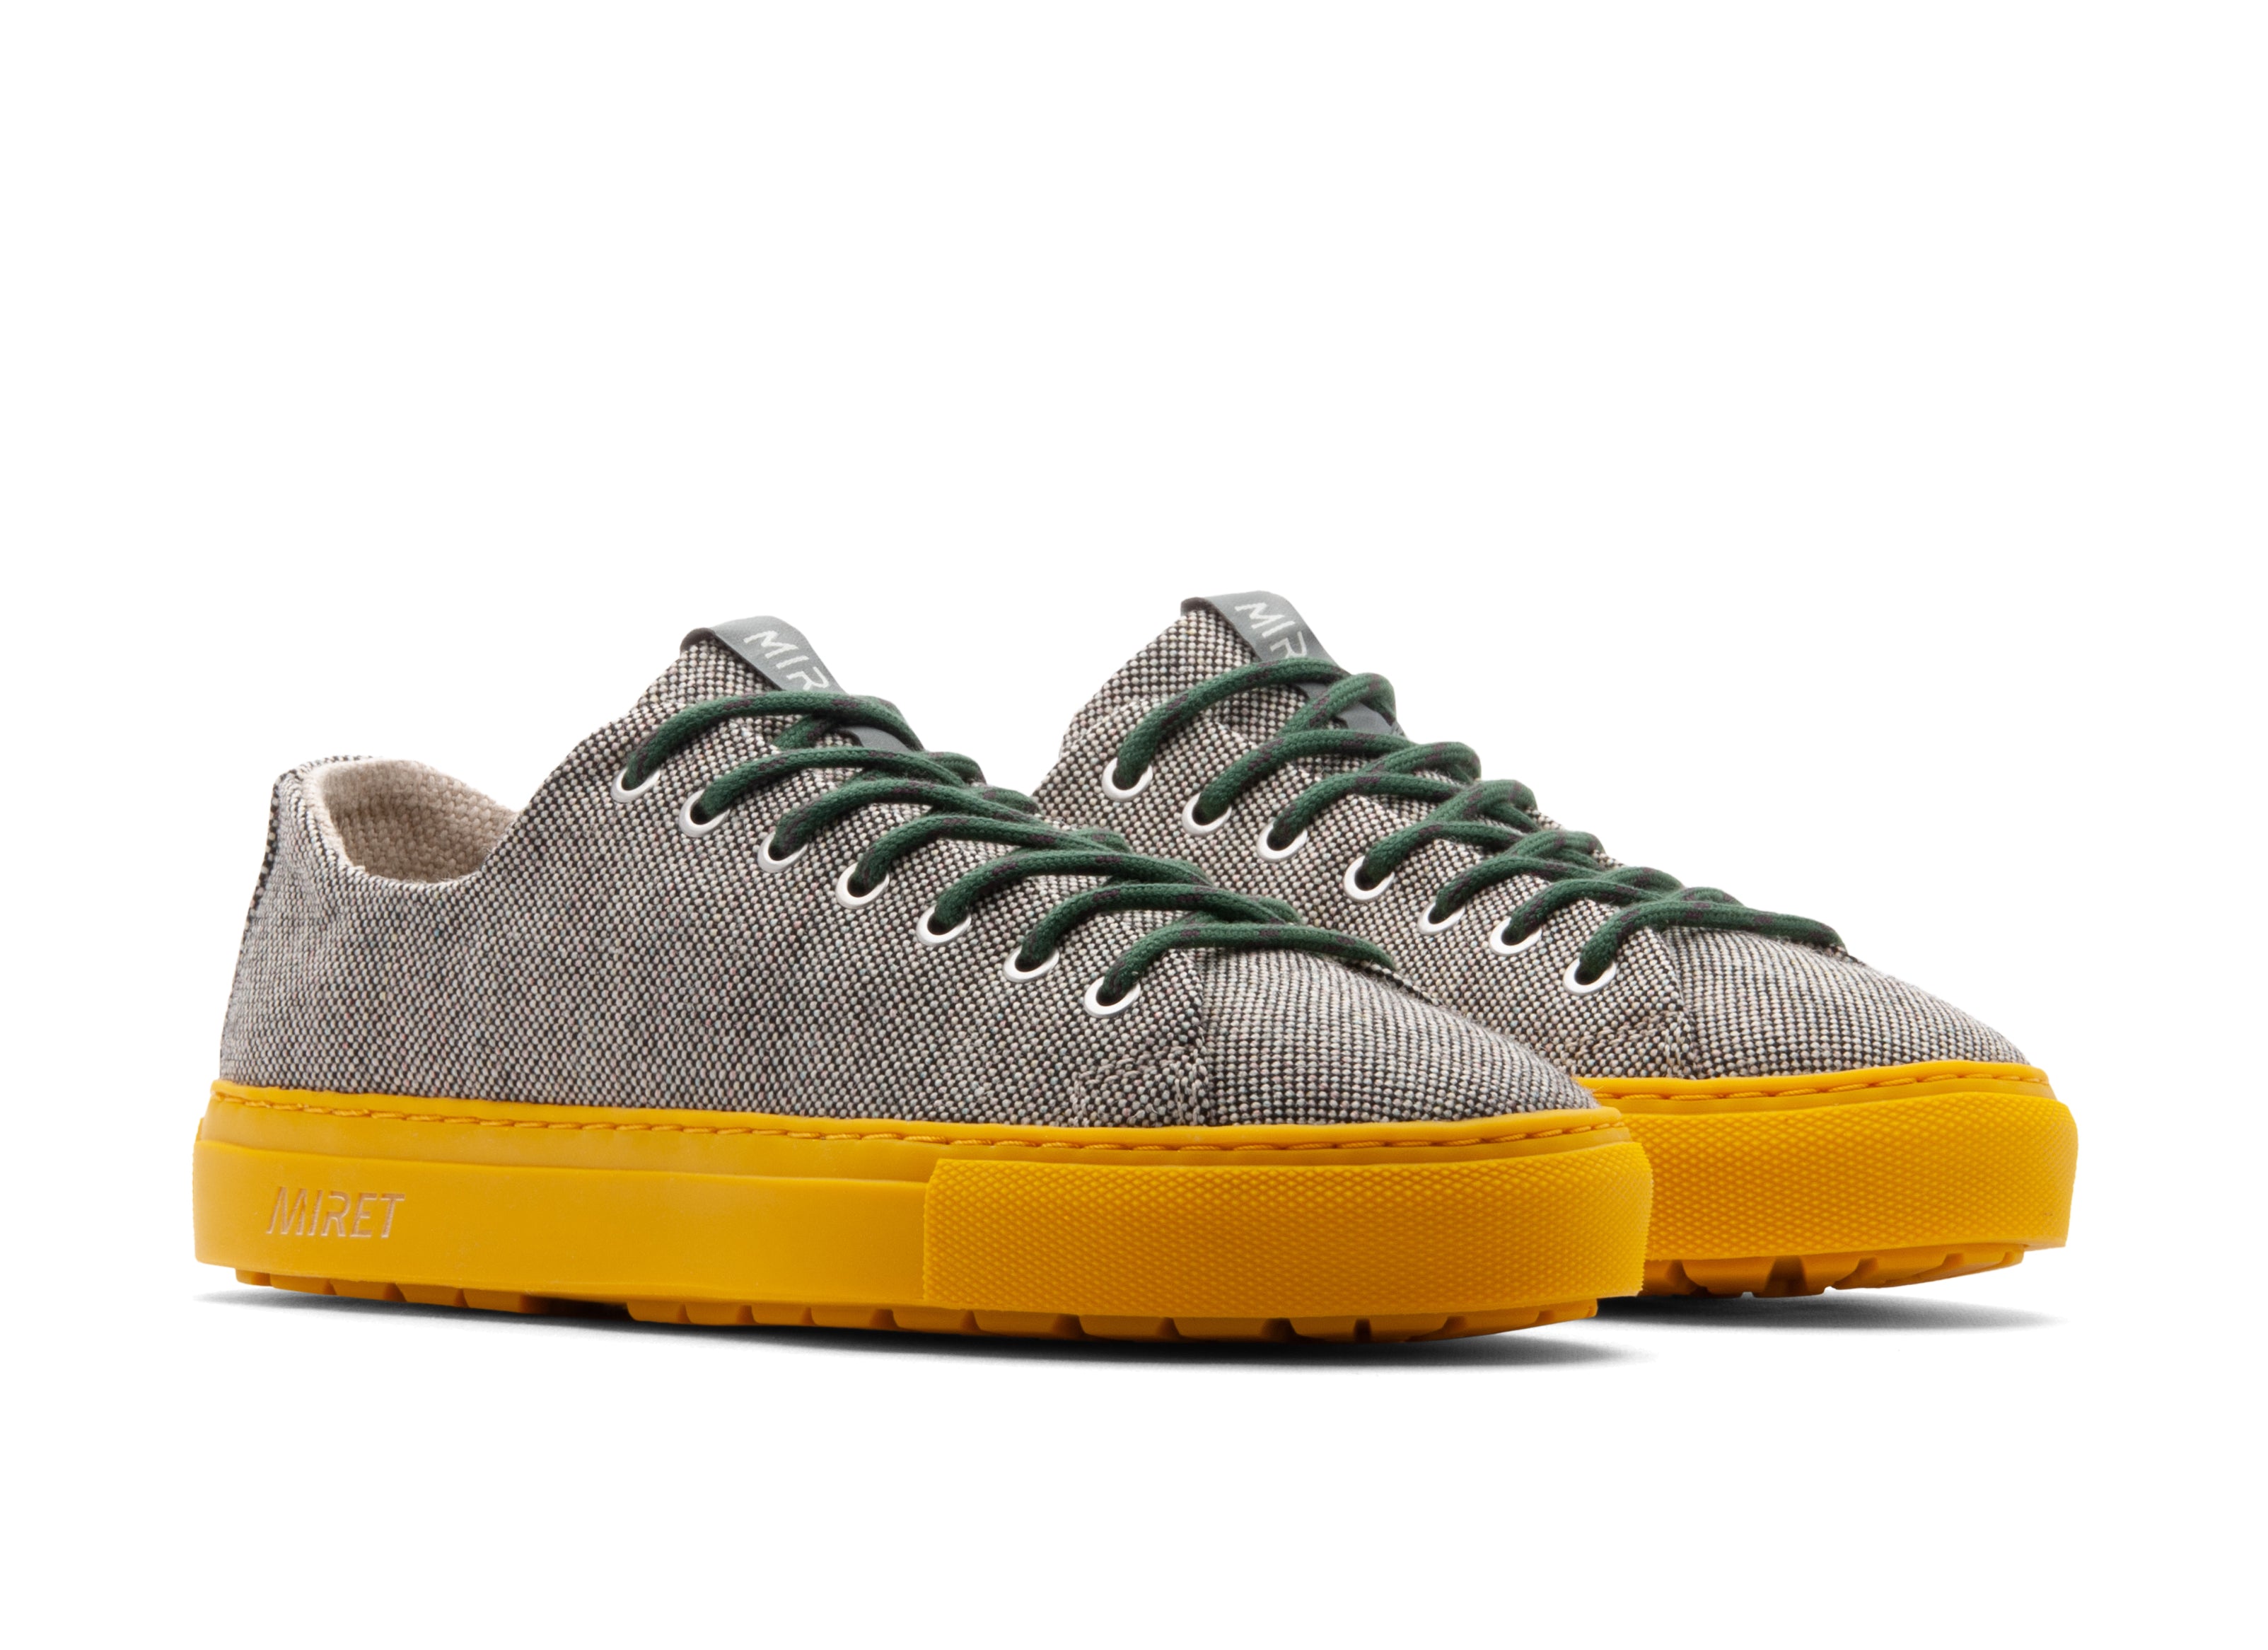 Low-top natural sneakers for winter in the color grey. Made from 100% thermoregulating and water-repellent wool with pure hemp lining, wool-covered cork insoles and natural rubber outsoles with deeper grooves for improved grip. OEKO-TEX certified sneakers manufactured in the EU. 